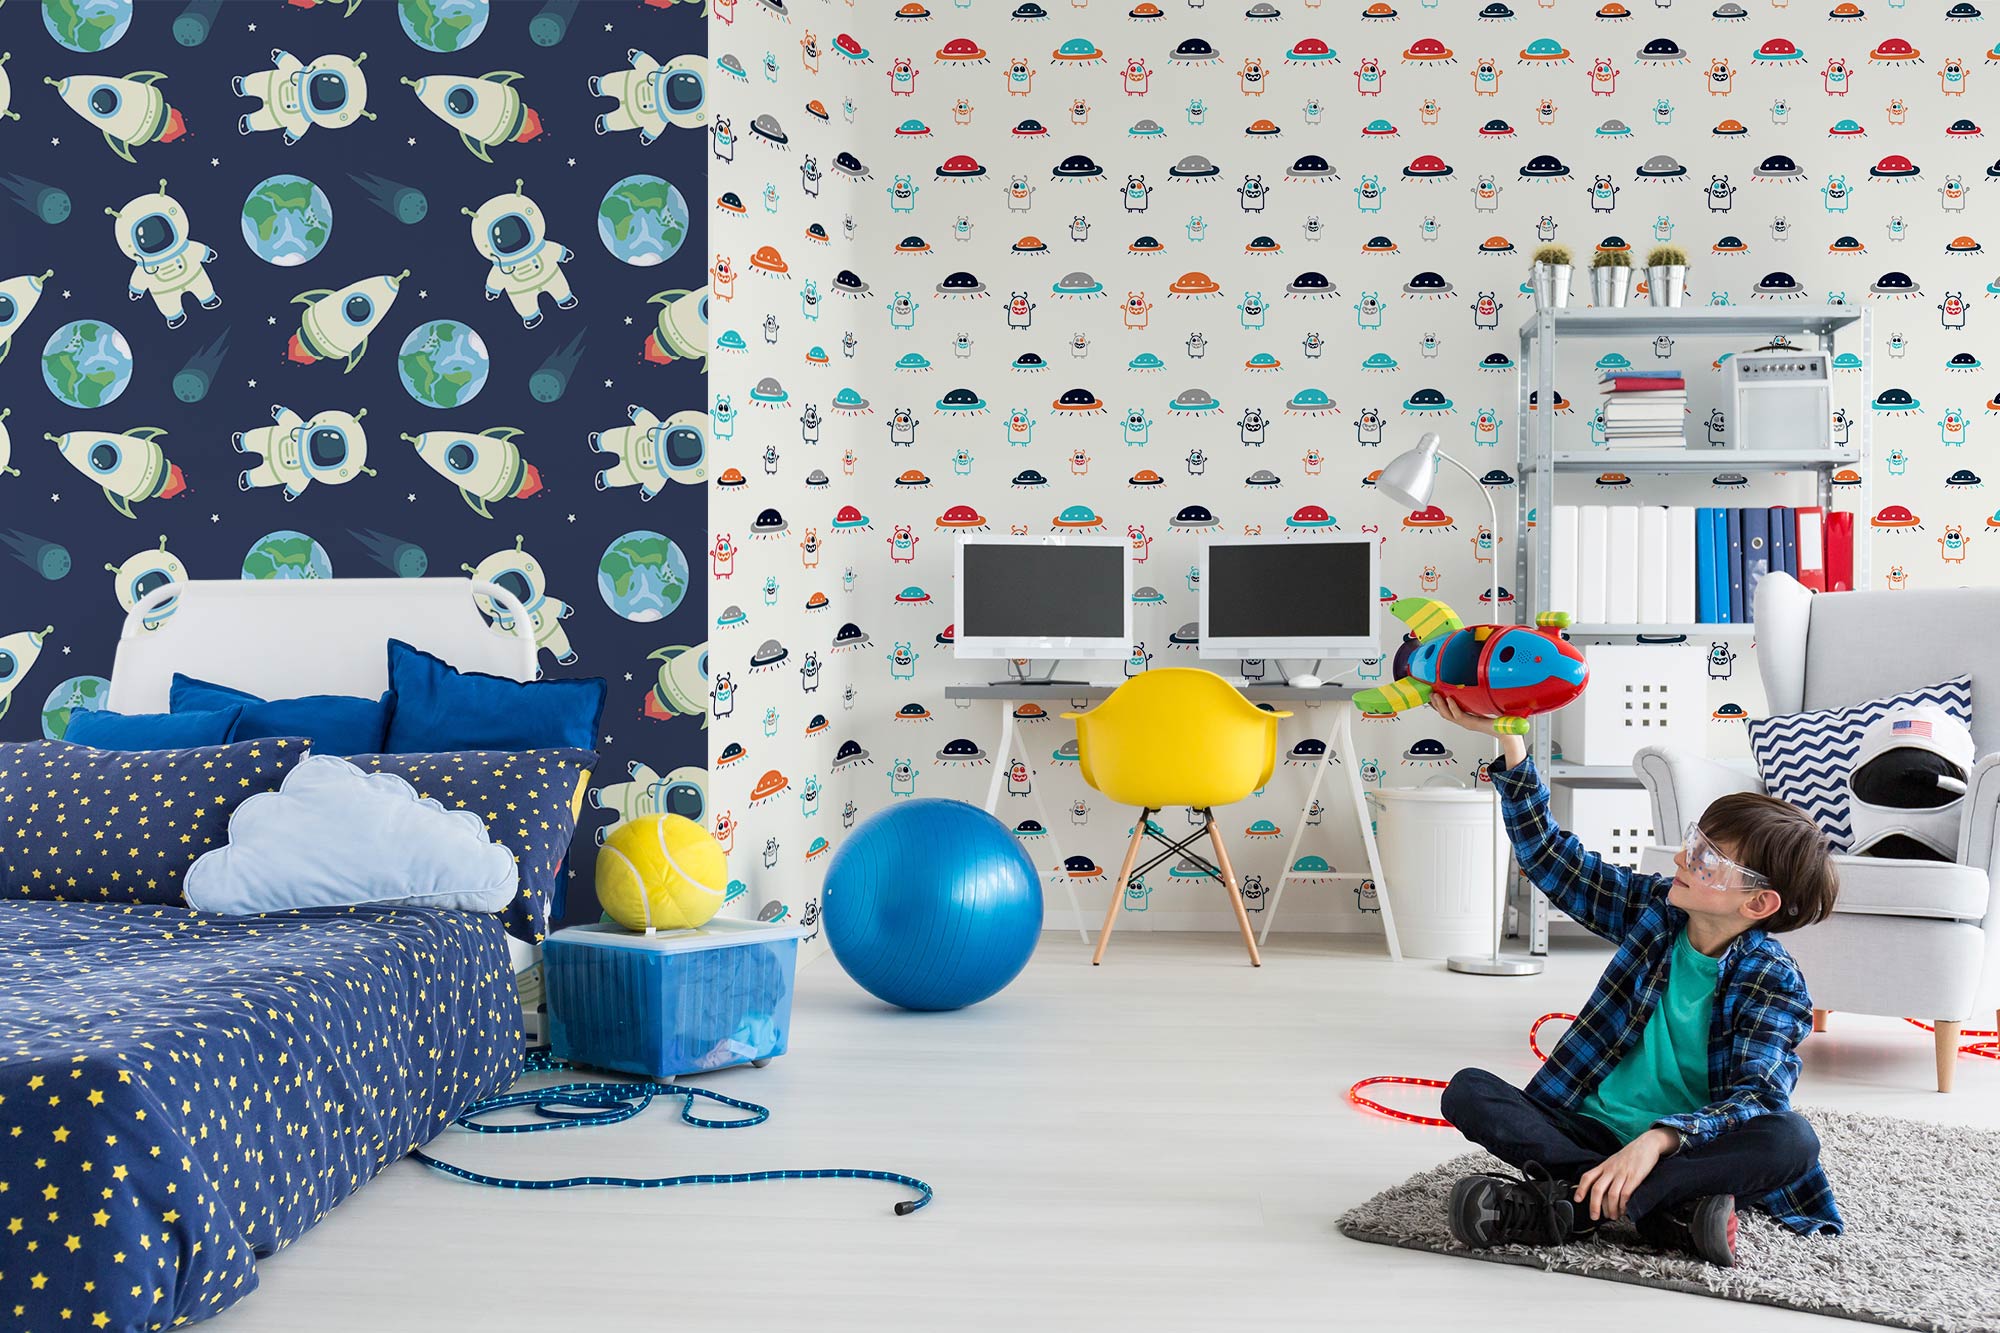 Cosmic fun • Contemporary - Abstraction - Kids room - Textures and patterns - Wall Murals